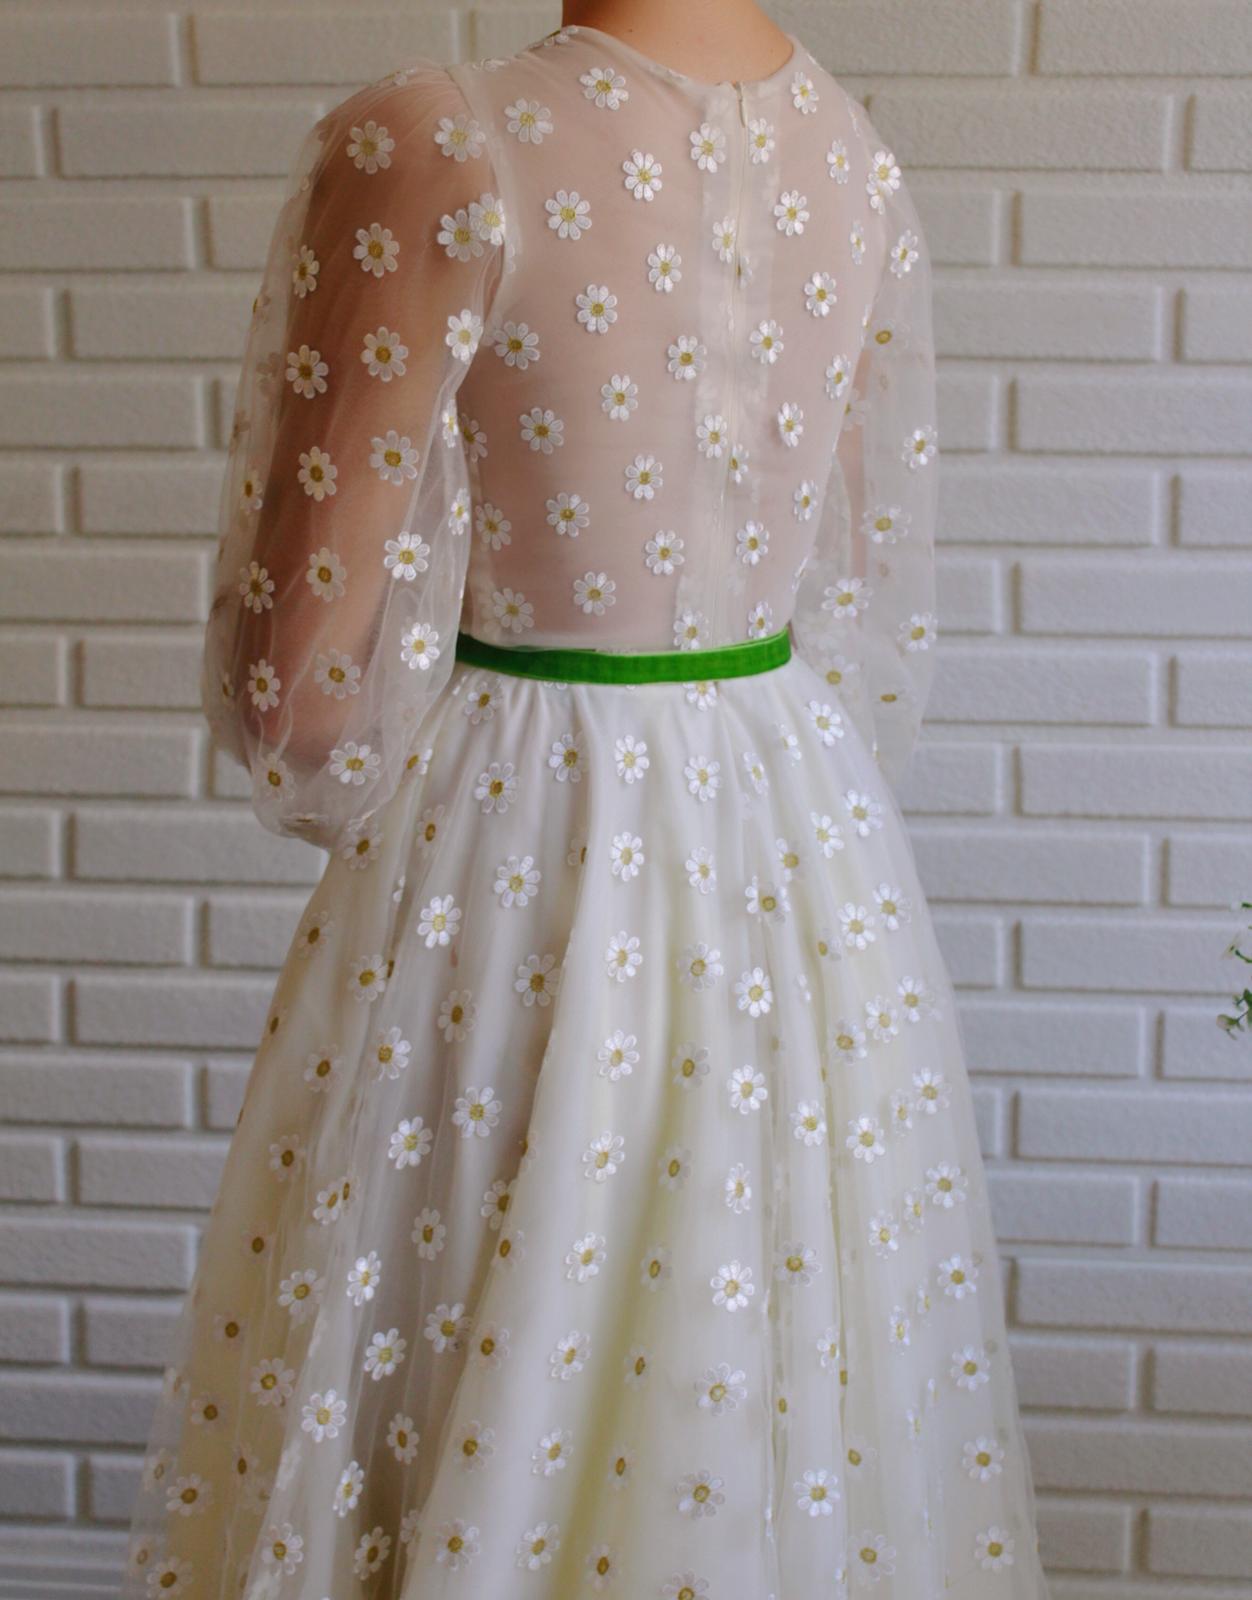 Beige A-Line dress with daisies and long sleeves